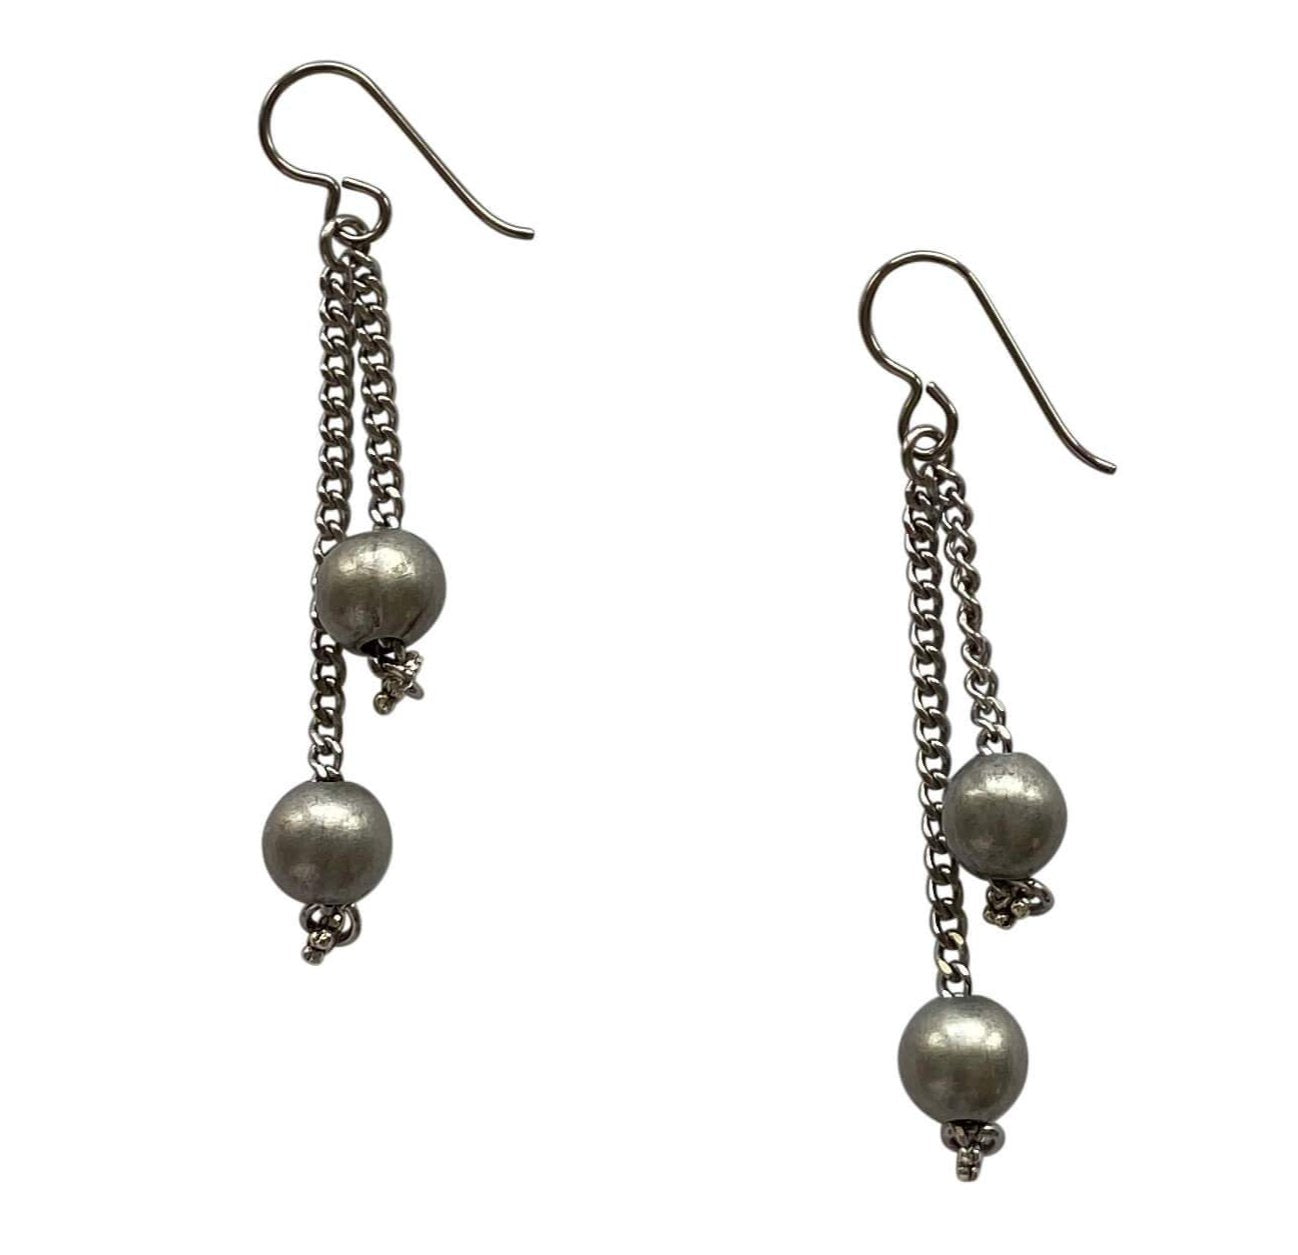 Silver Steel Round Bead and Chain Earrings with Niobium Ear Wires for Sensitive Ears-Earrings- Creative Jewelry by Marcia